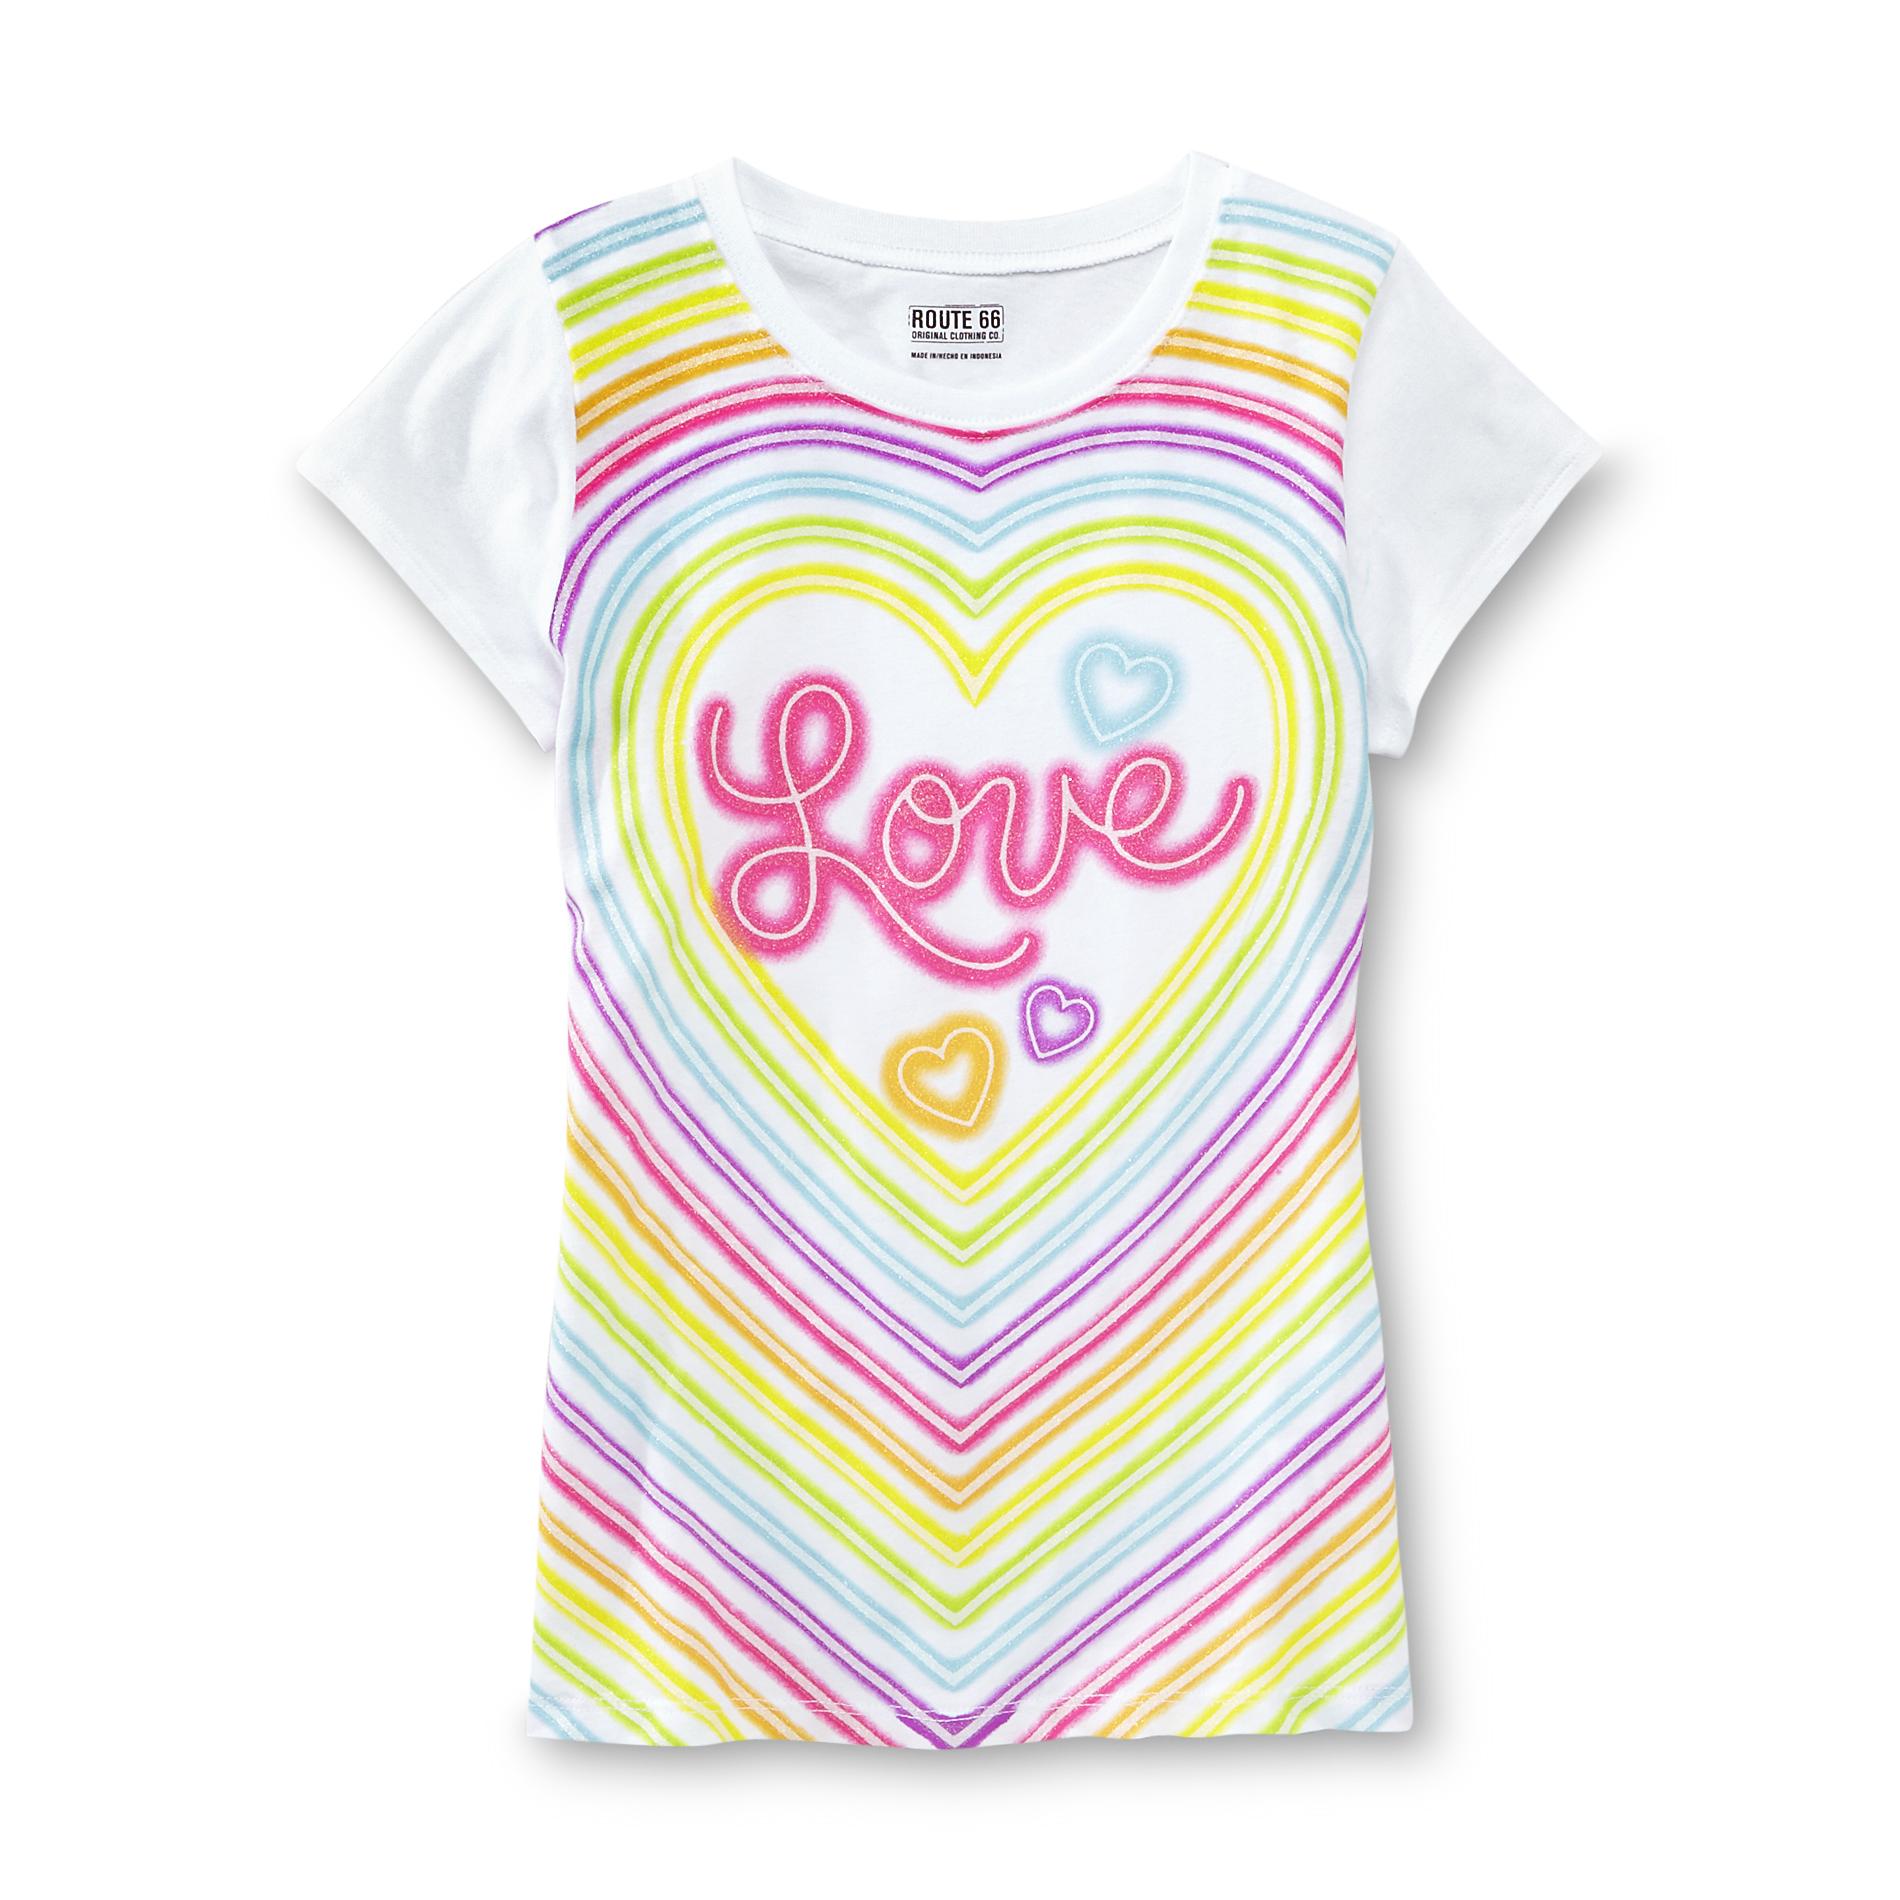 Route 66 Girl's Graphic T-Shirt - Love